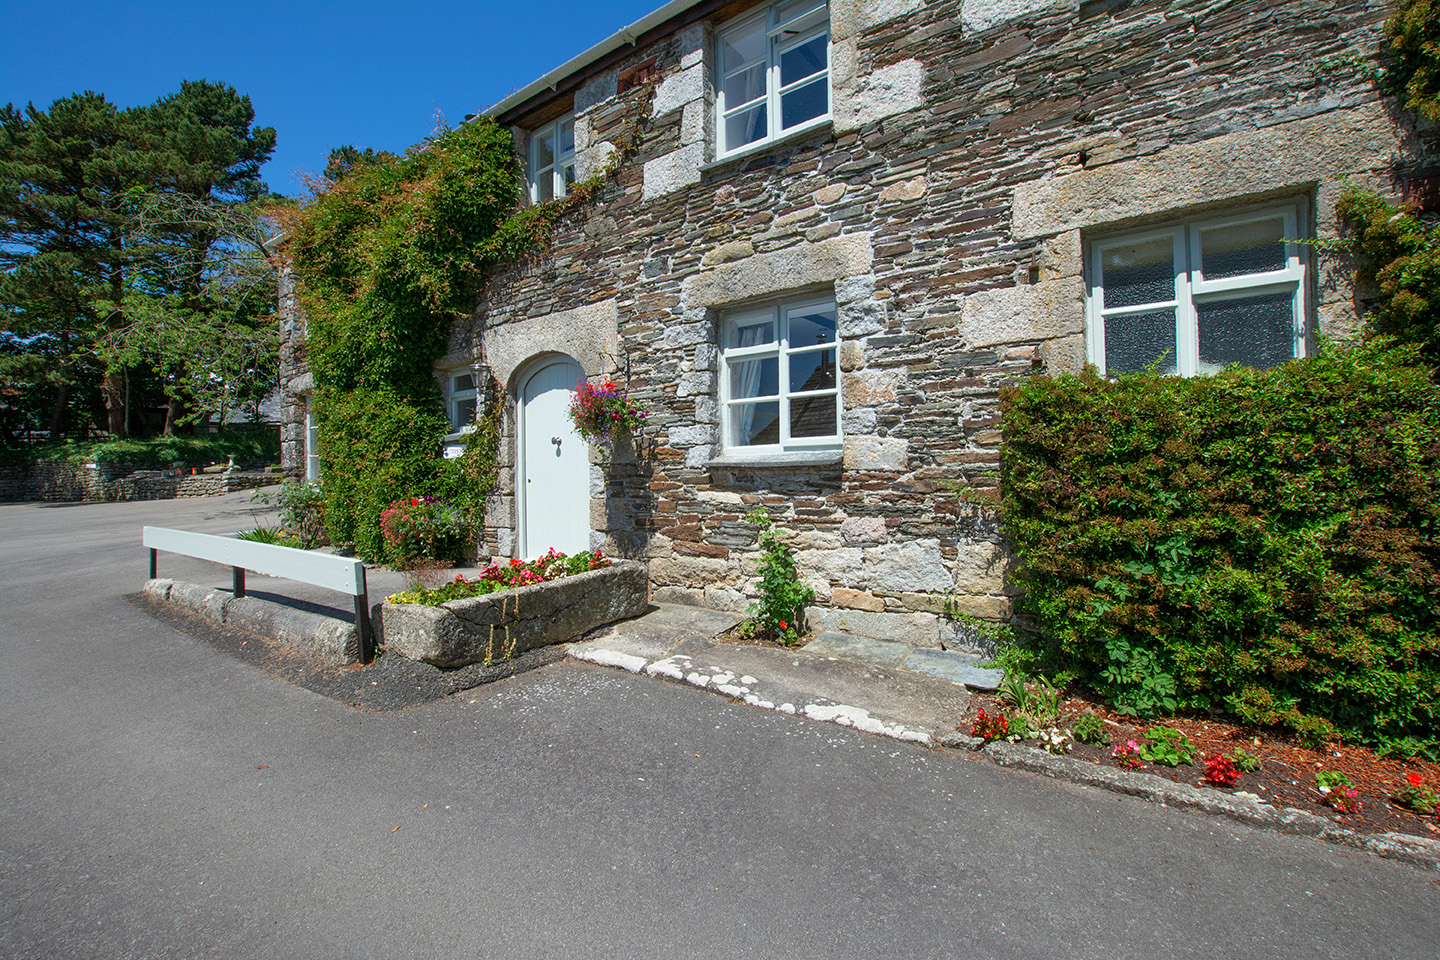 The exterior of Butterwell luxury self catering converted barn holiday cottage at Penrose Burden in North Cornwall 01.jpg